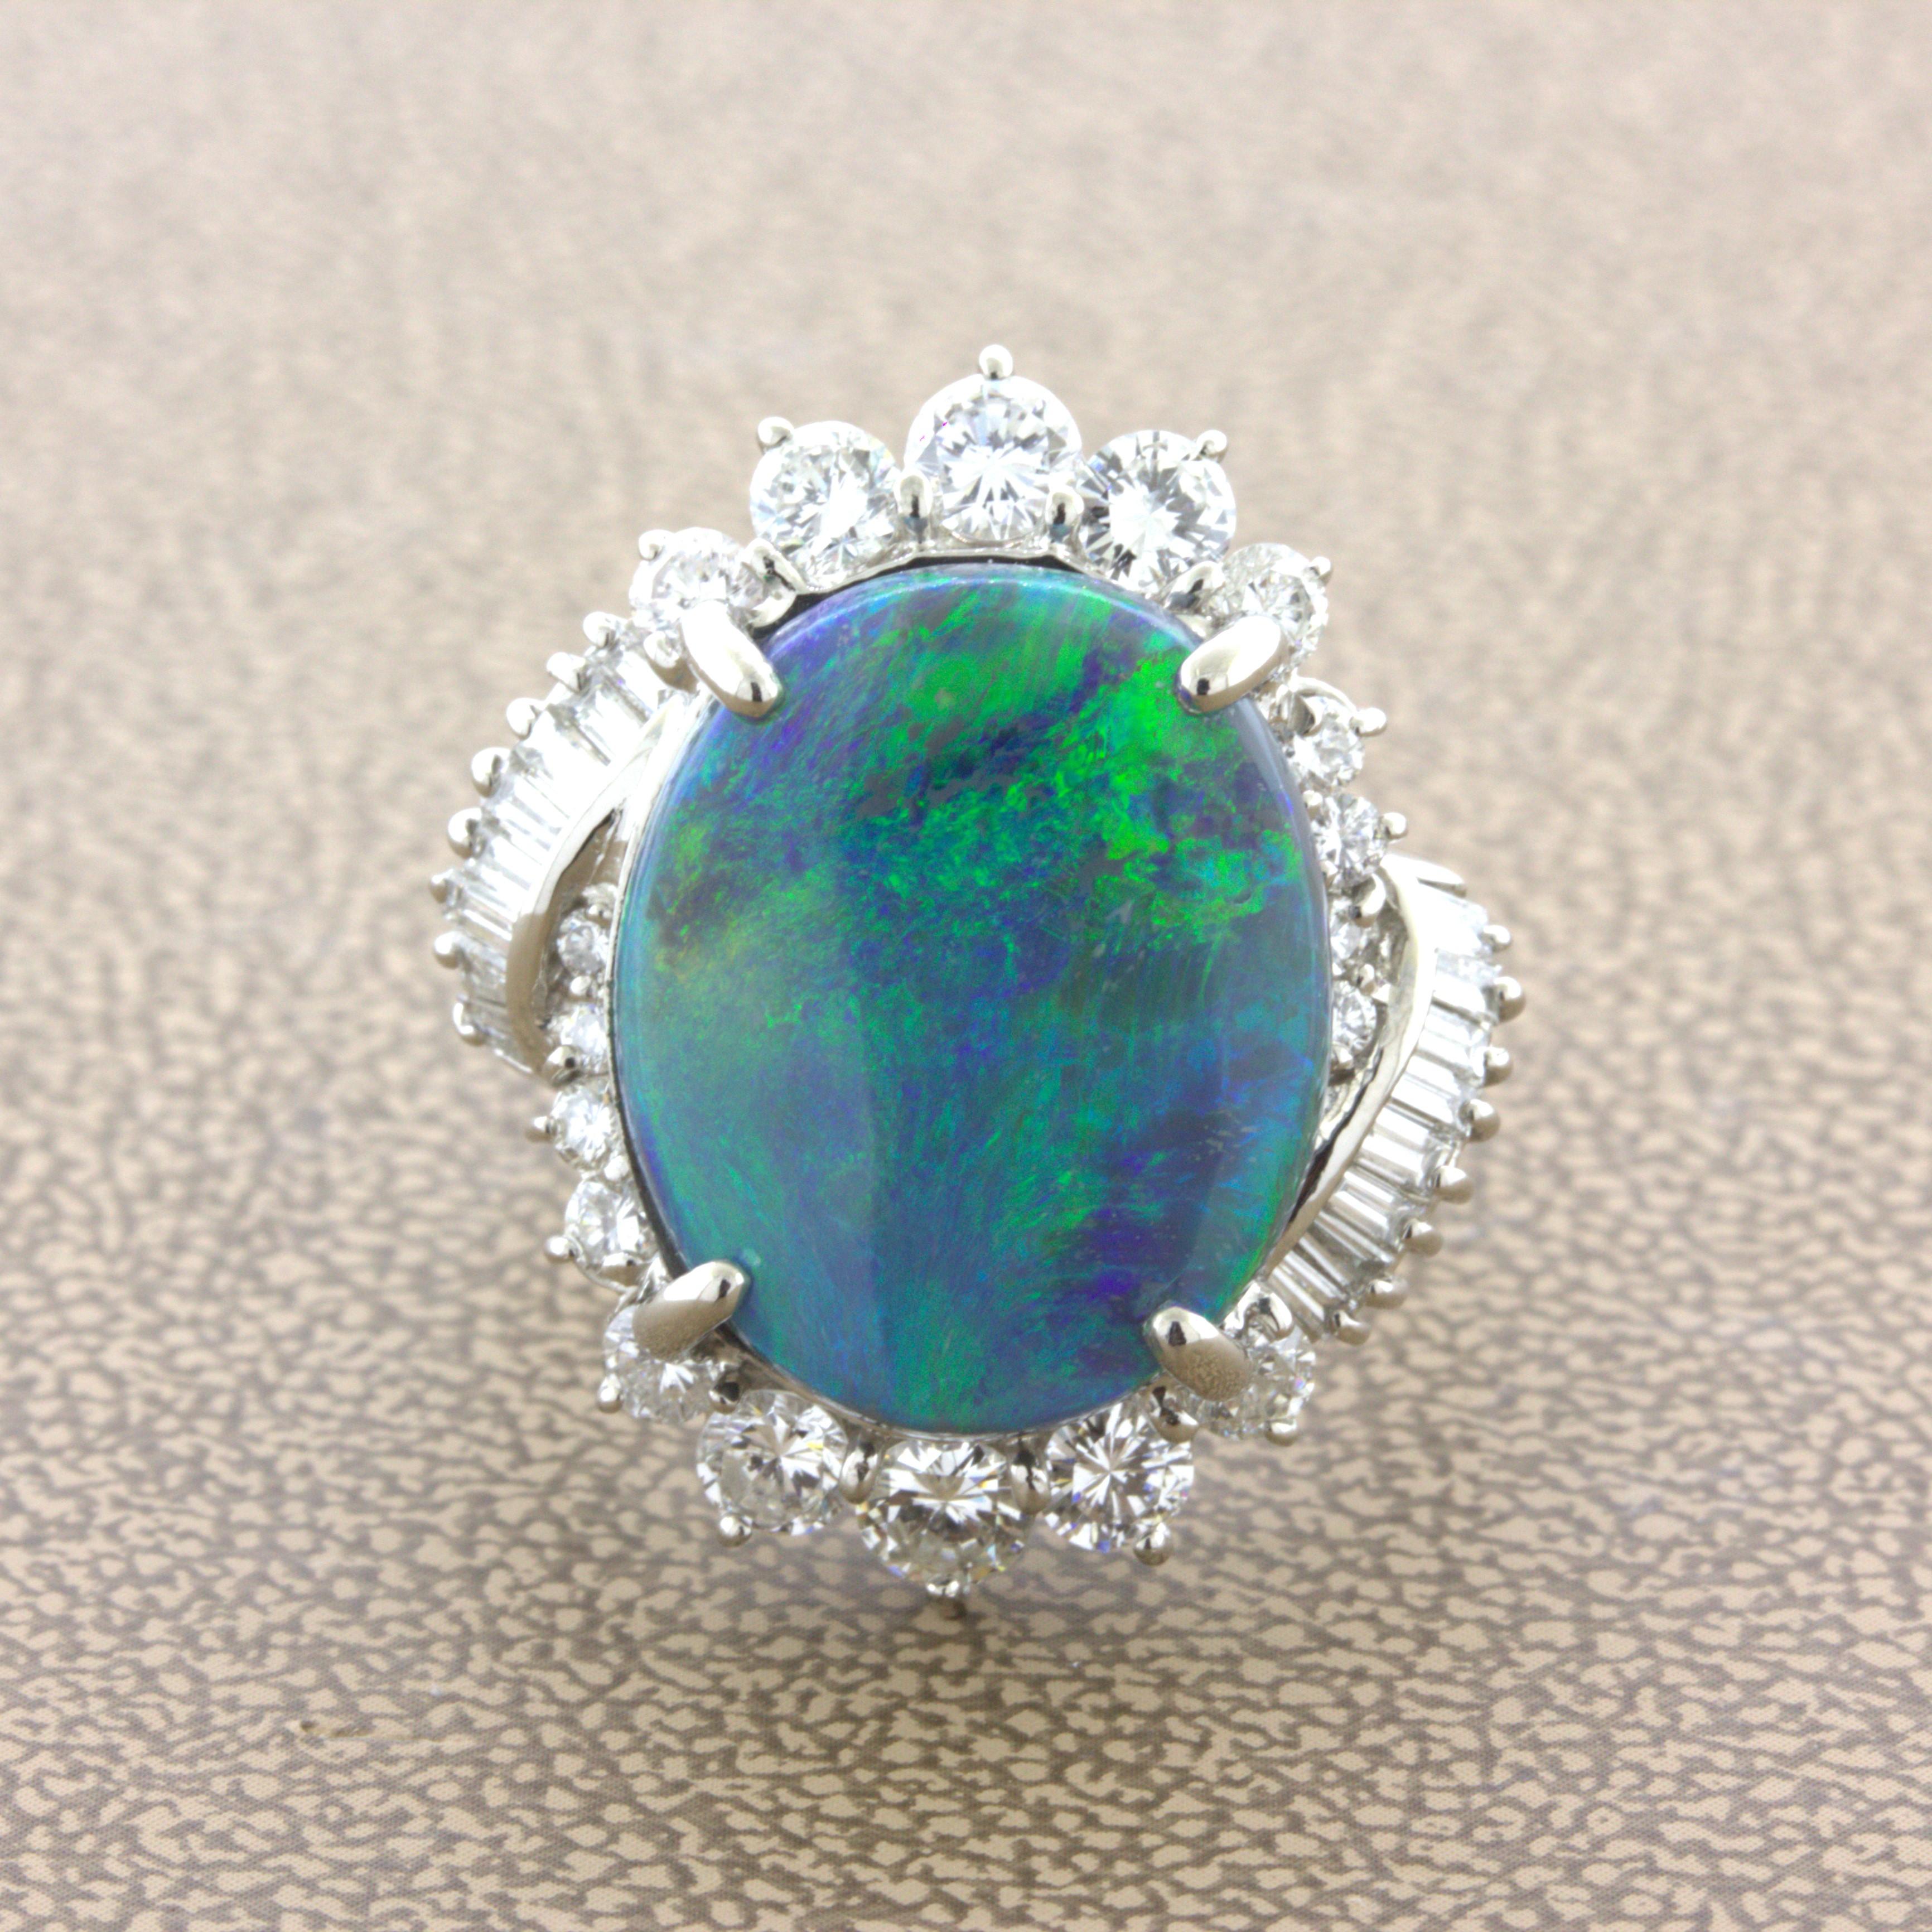 A very fine and beautifully shaped black Australian opal takes center stage. It weighs 6.79 carats and has a unique color pattern with strong blue-green play-of-color. It is accented by 1.66 carats of round brilliant and baguette-cut diamonds set